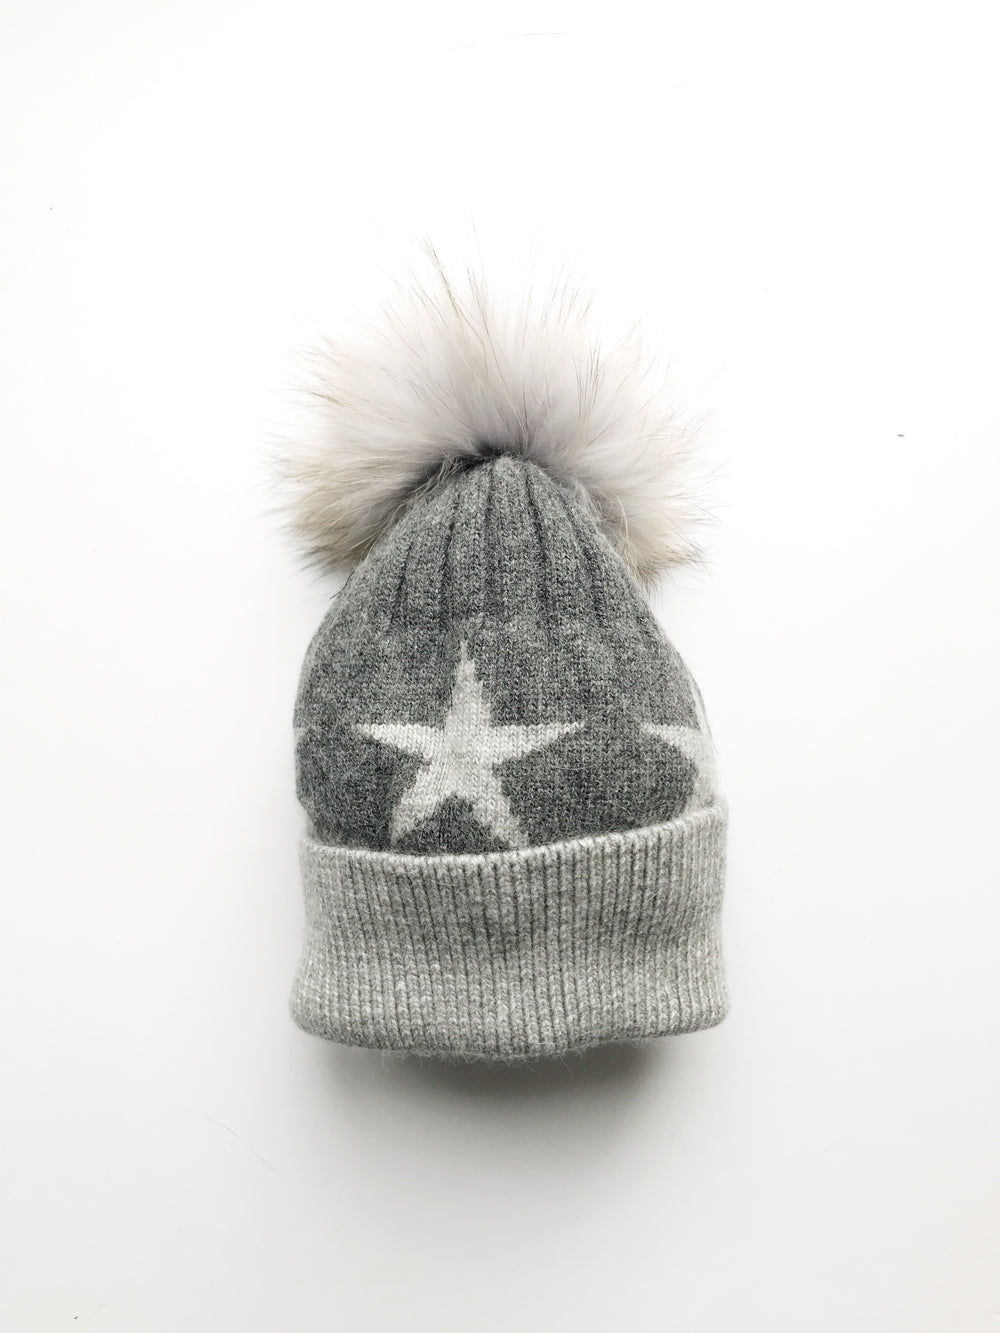 Equation Starry Hat in Dark gray with heather gray stars / EQUATION Boutique